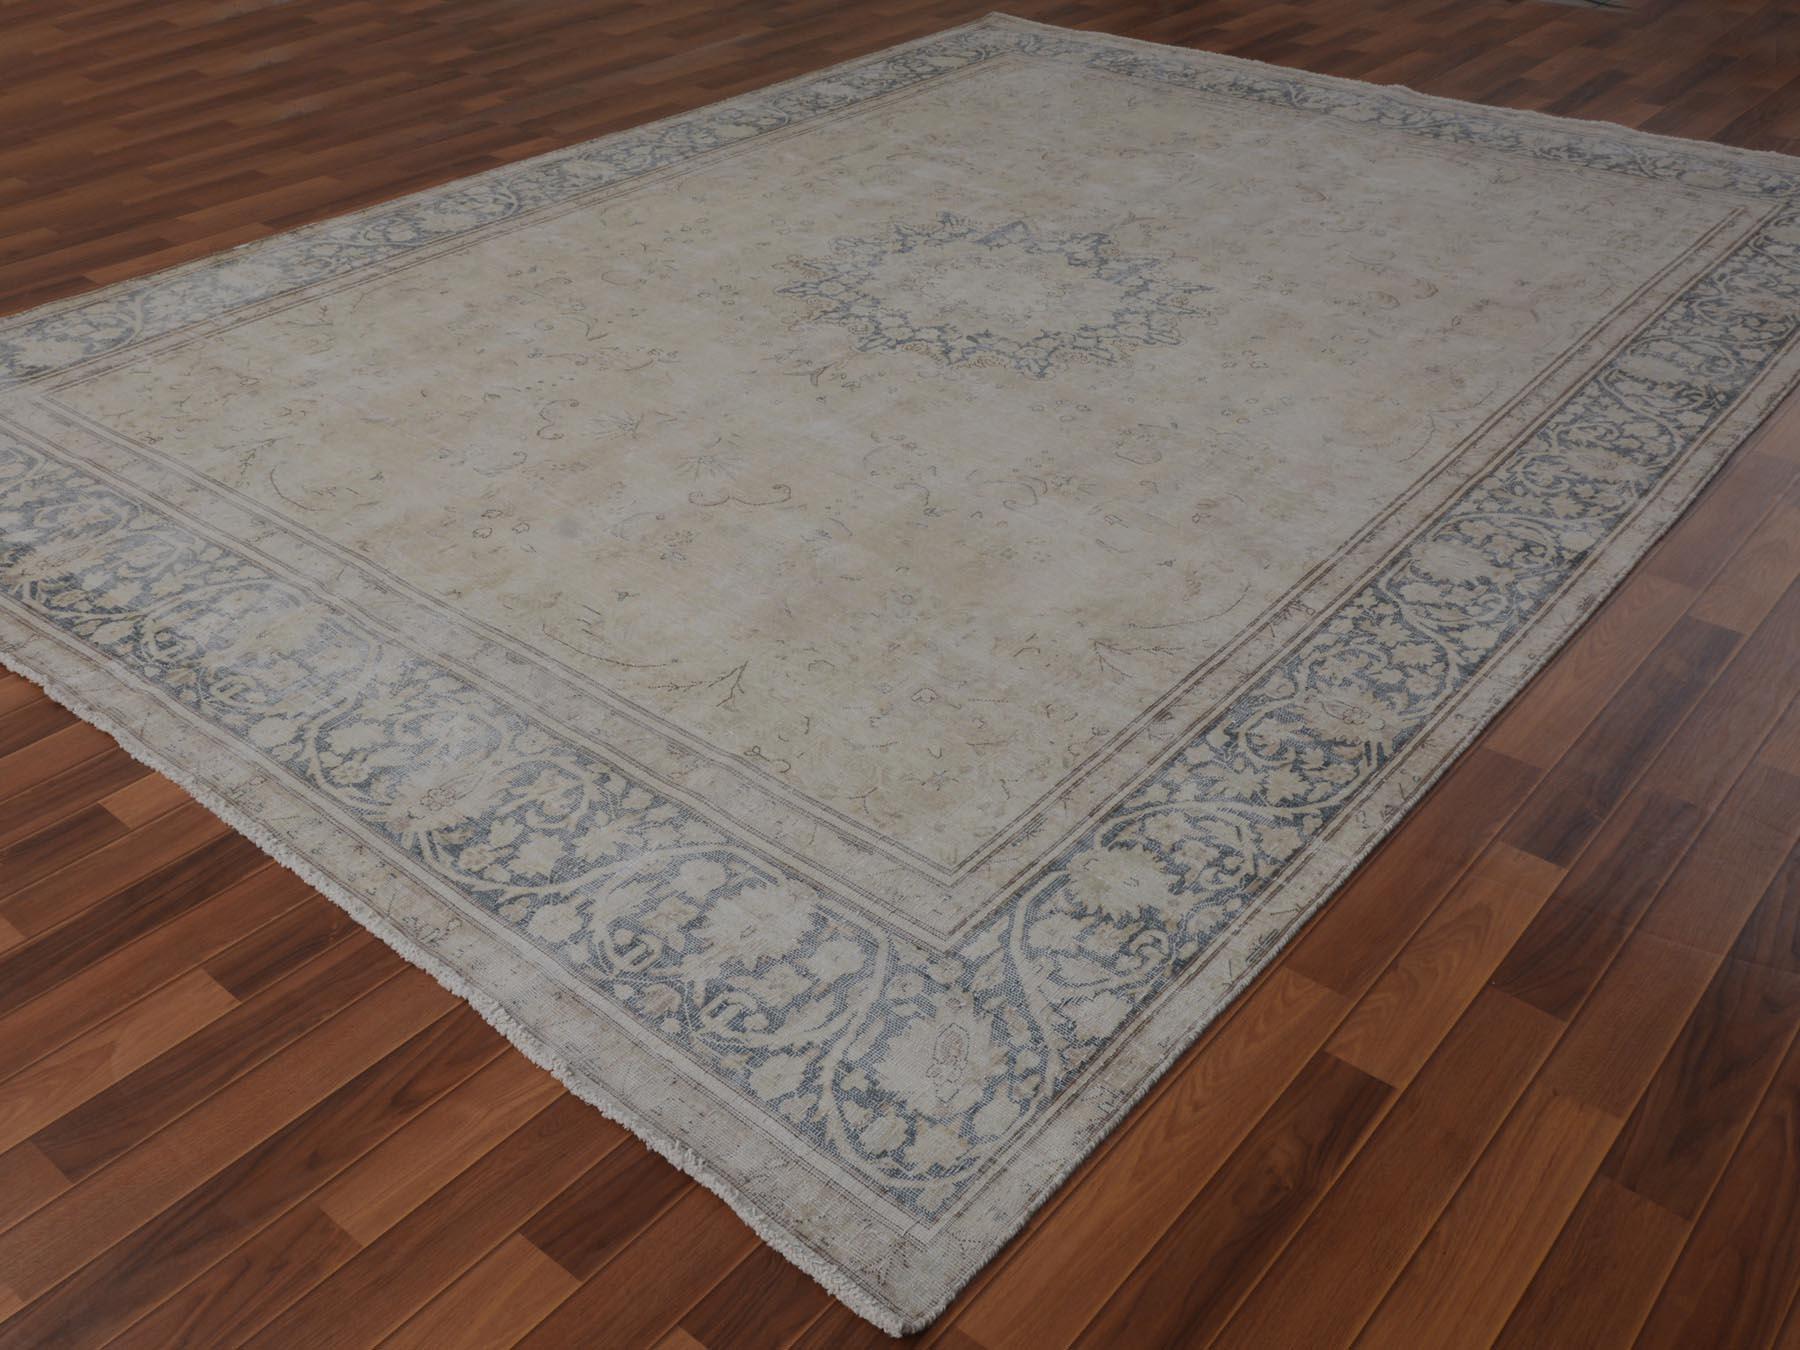 Medieval Washed Out Vintage Persian Kerman Worn Down Hand Knotted Pure Wool Oriental Rug